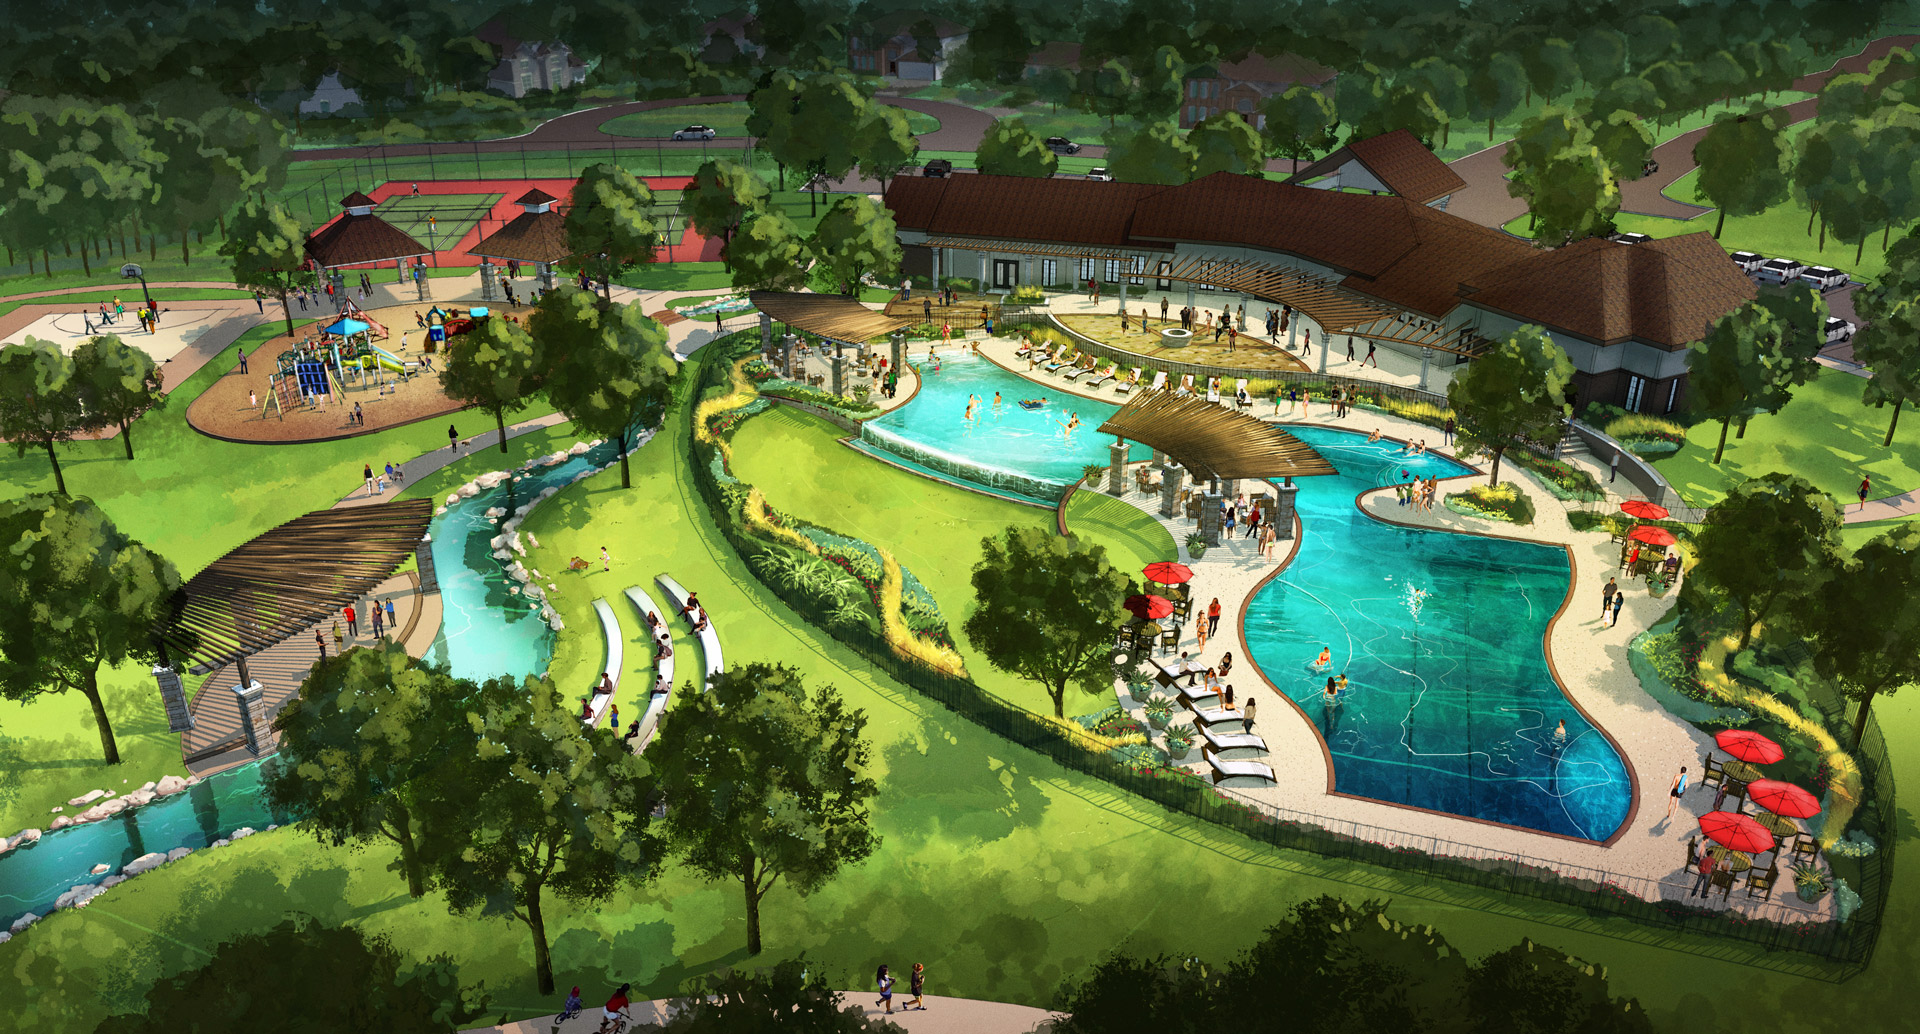 Riverchase-Amenity-Center---Aerial-Perspective-2